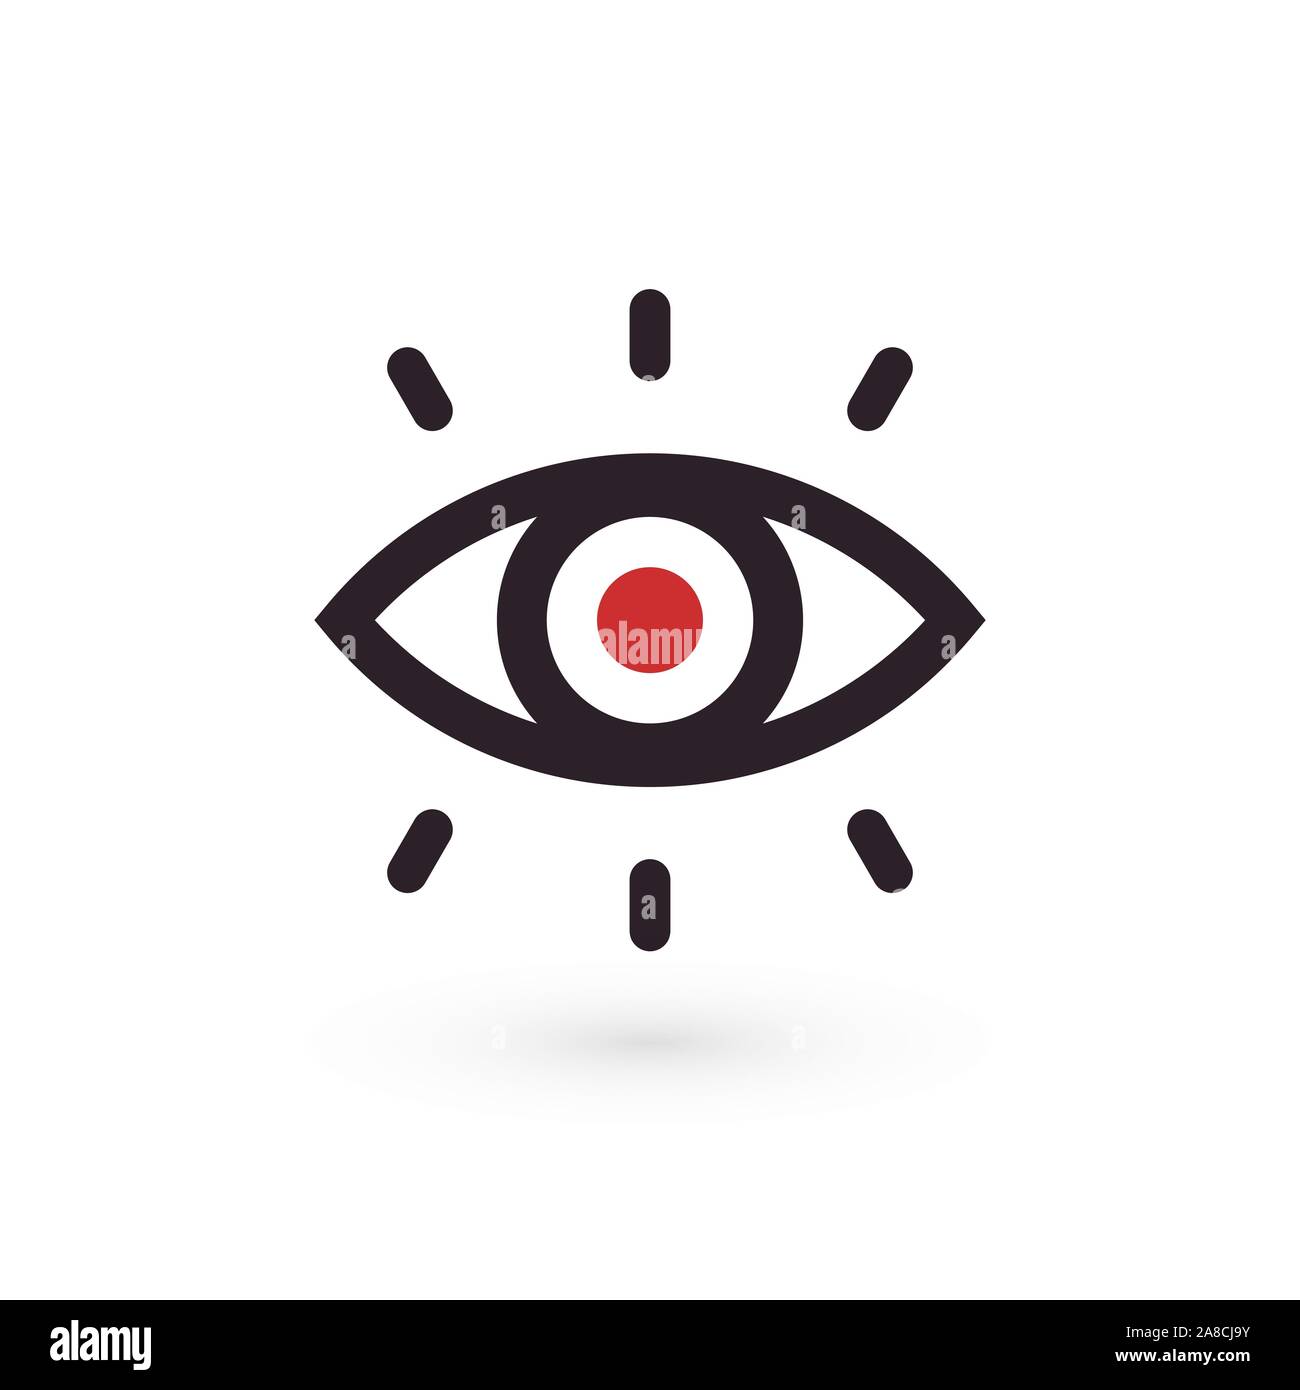 Eye outline icon, linear style, perfect for vision icon, eye surgery emblem, retina recognition tech logotype, optical innovative developments logo Stock Vector